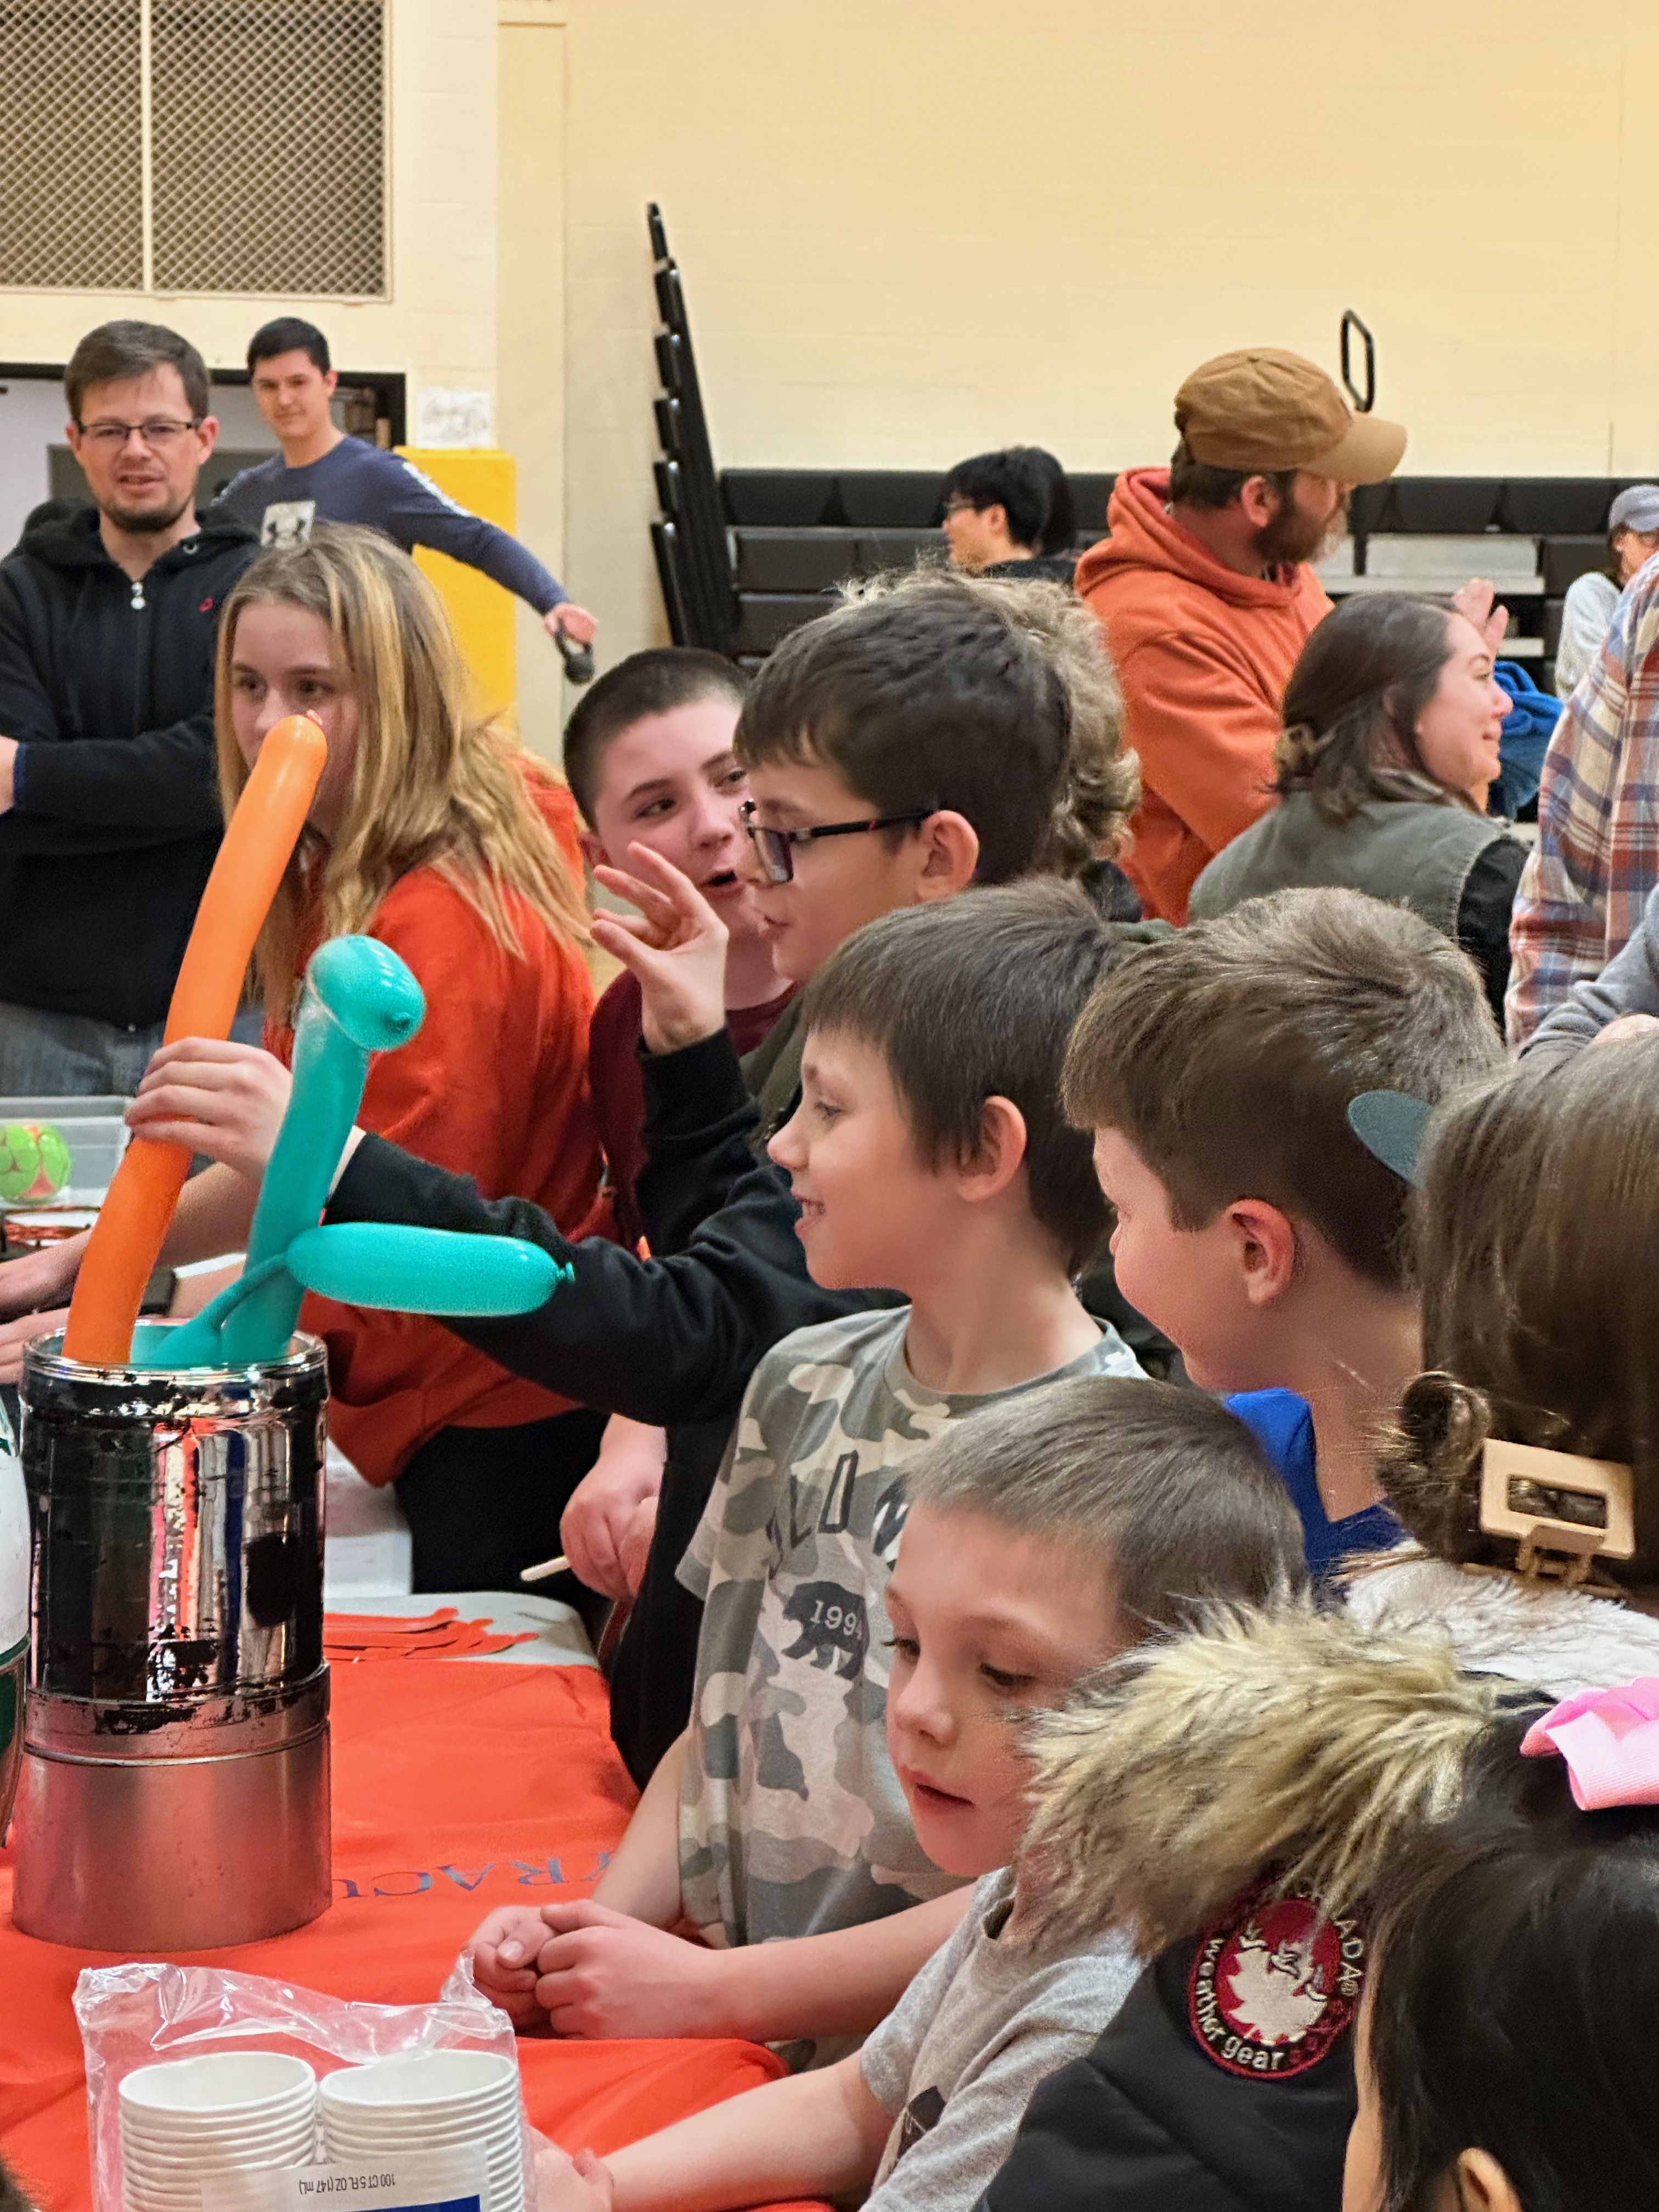 A bunch of students cluster at a display table at a Science Night event, where a college student is working with balloons to demonstrate chemistry and physics